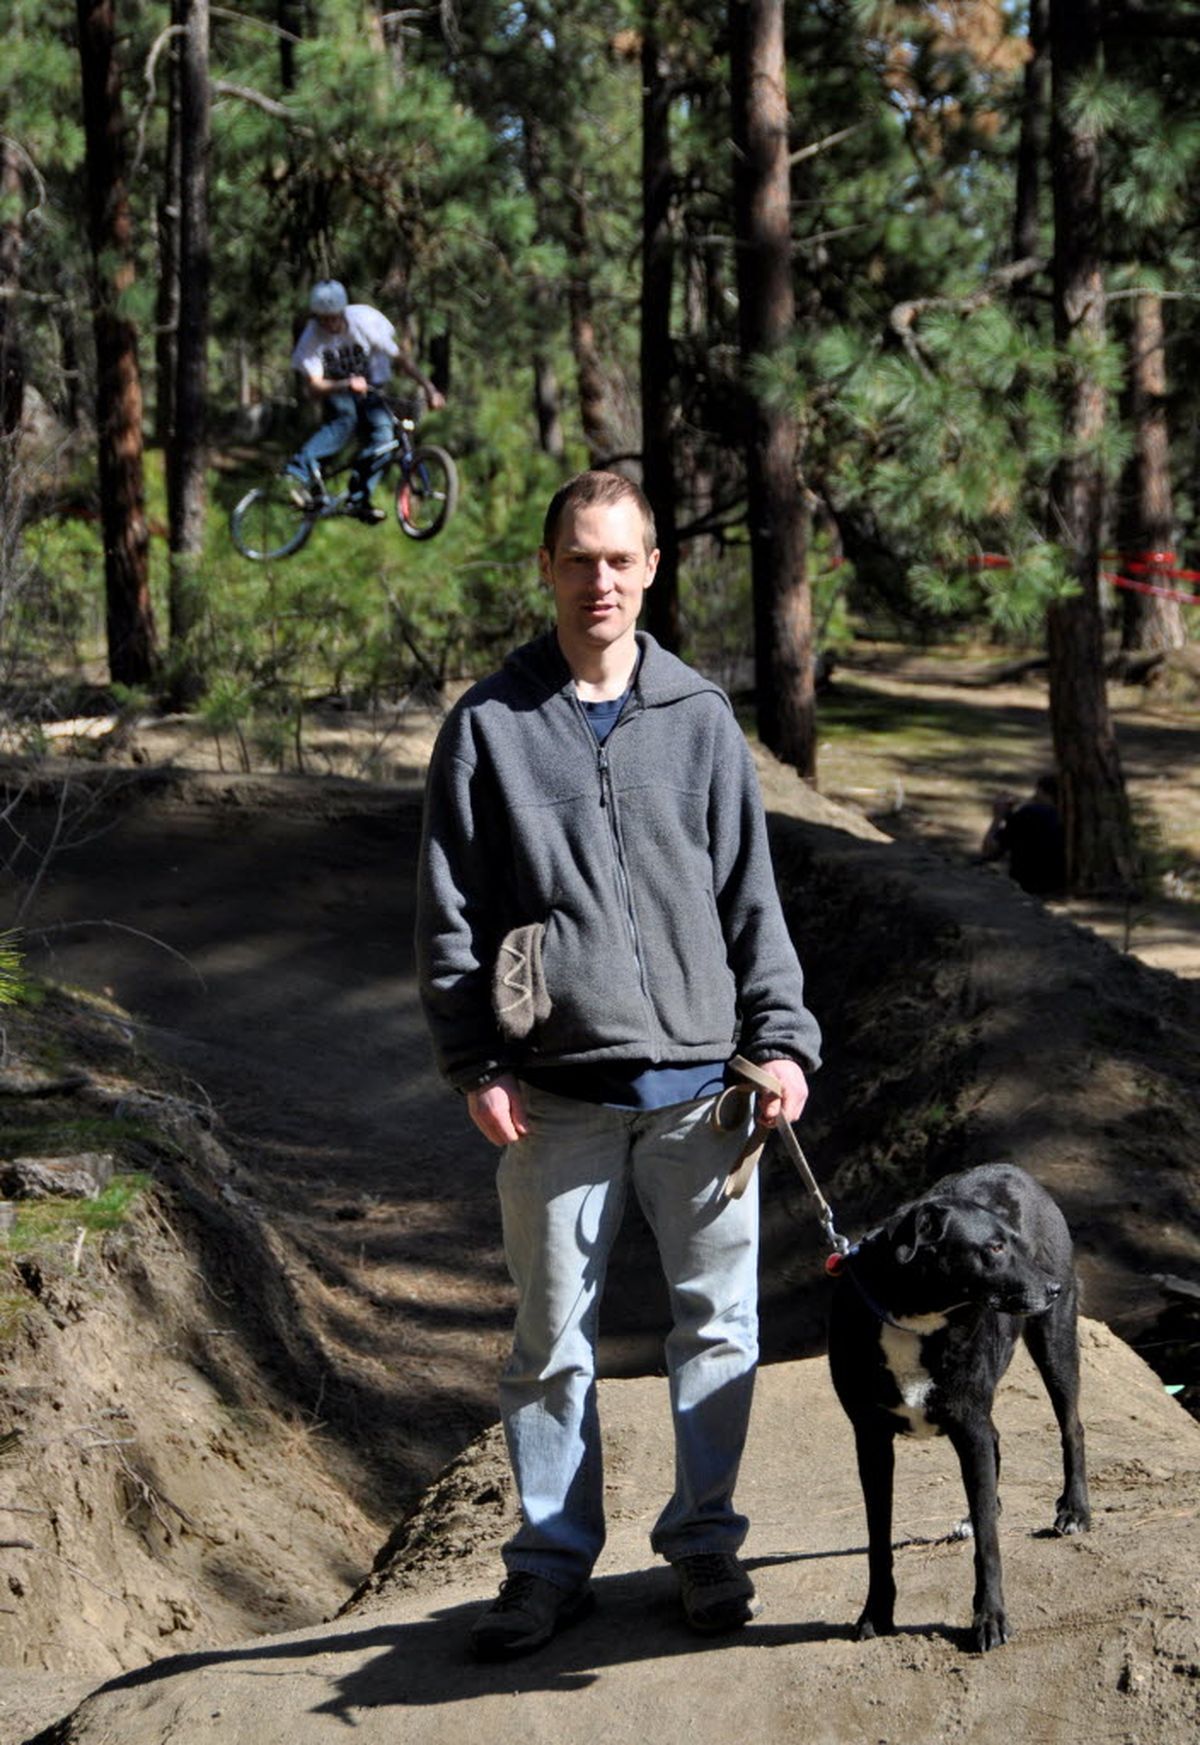 Peter Jantz, caretaker at Camp Sekani off Upriver Drive has been involved in mountain bike trail development on the Spokane city parks land for years. (Rich Landers)